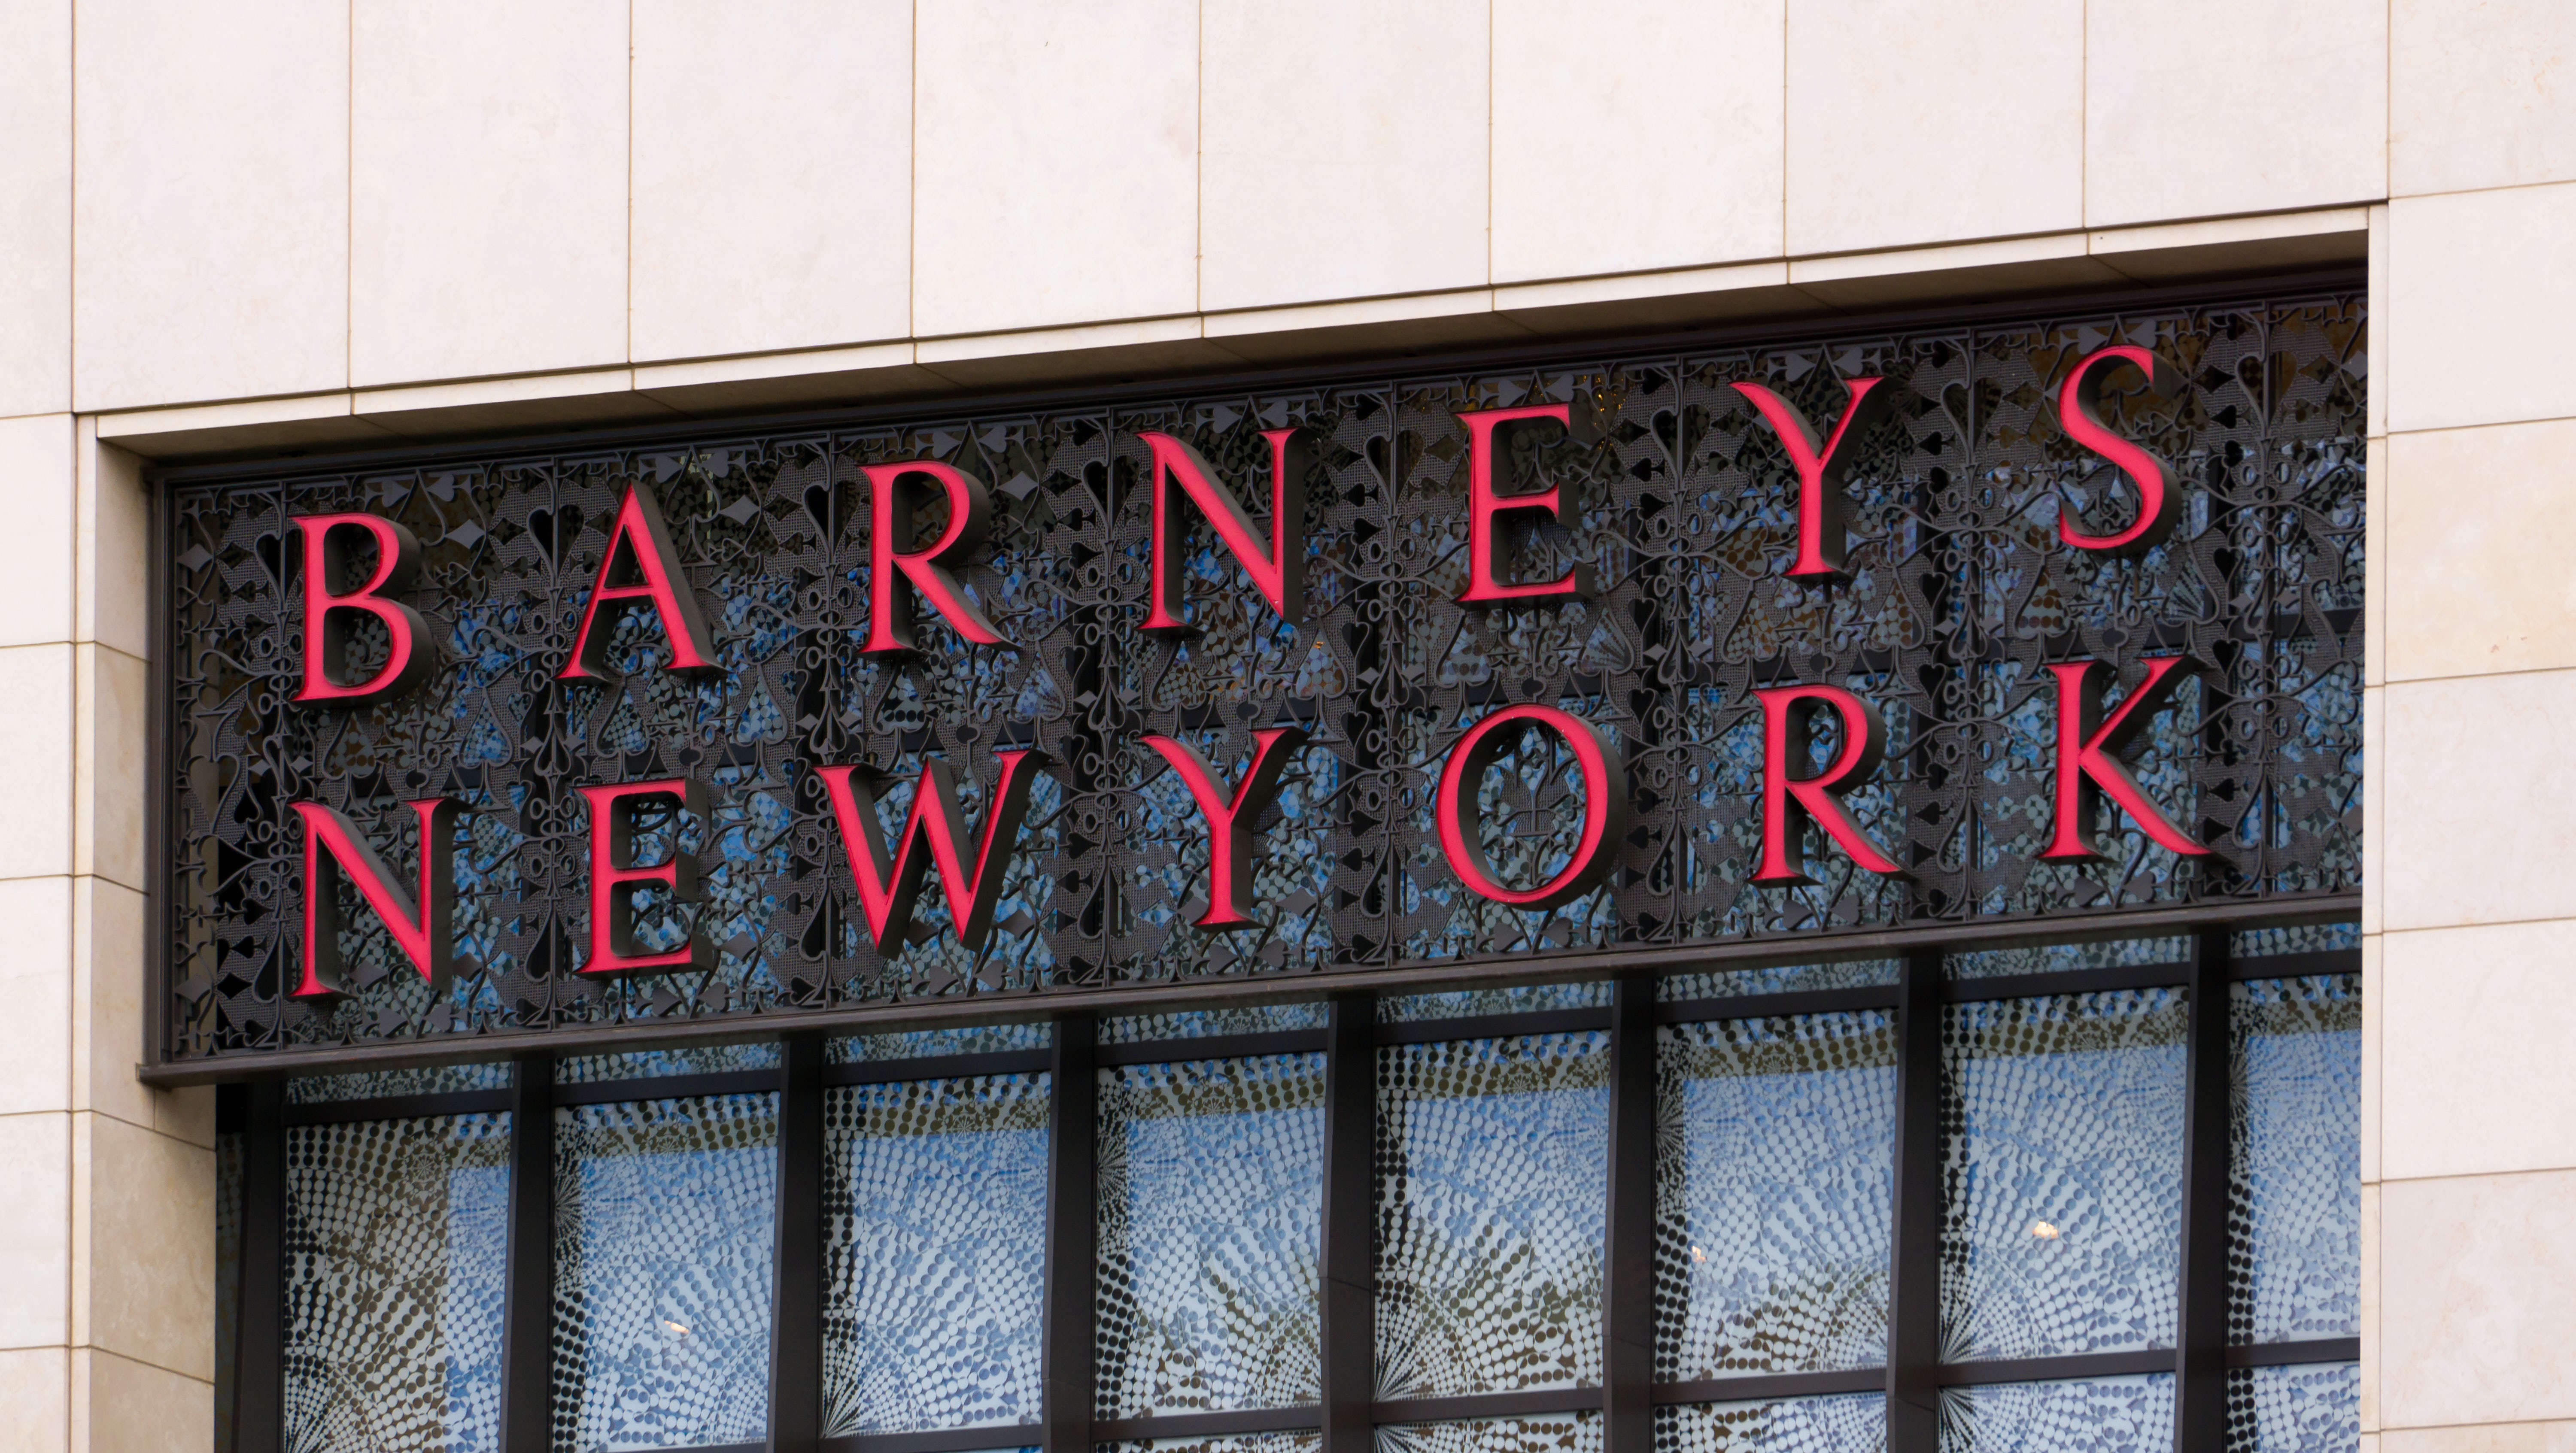 It's Official: Barneys New York's New Owner Is Authentic Brands Group